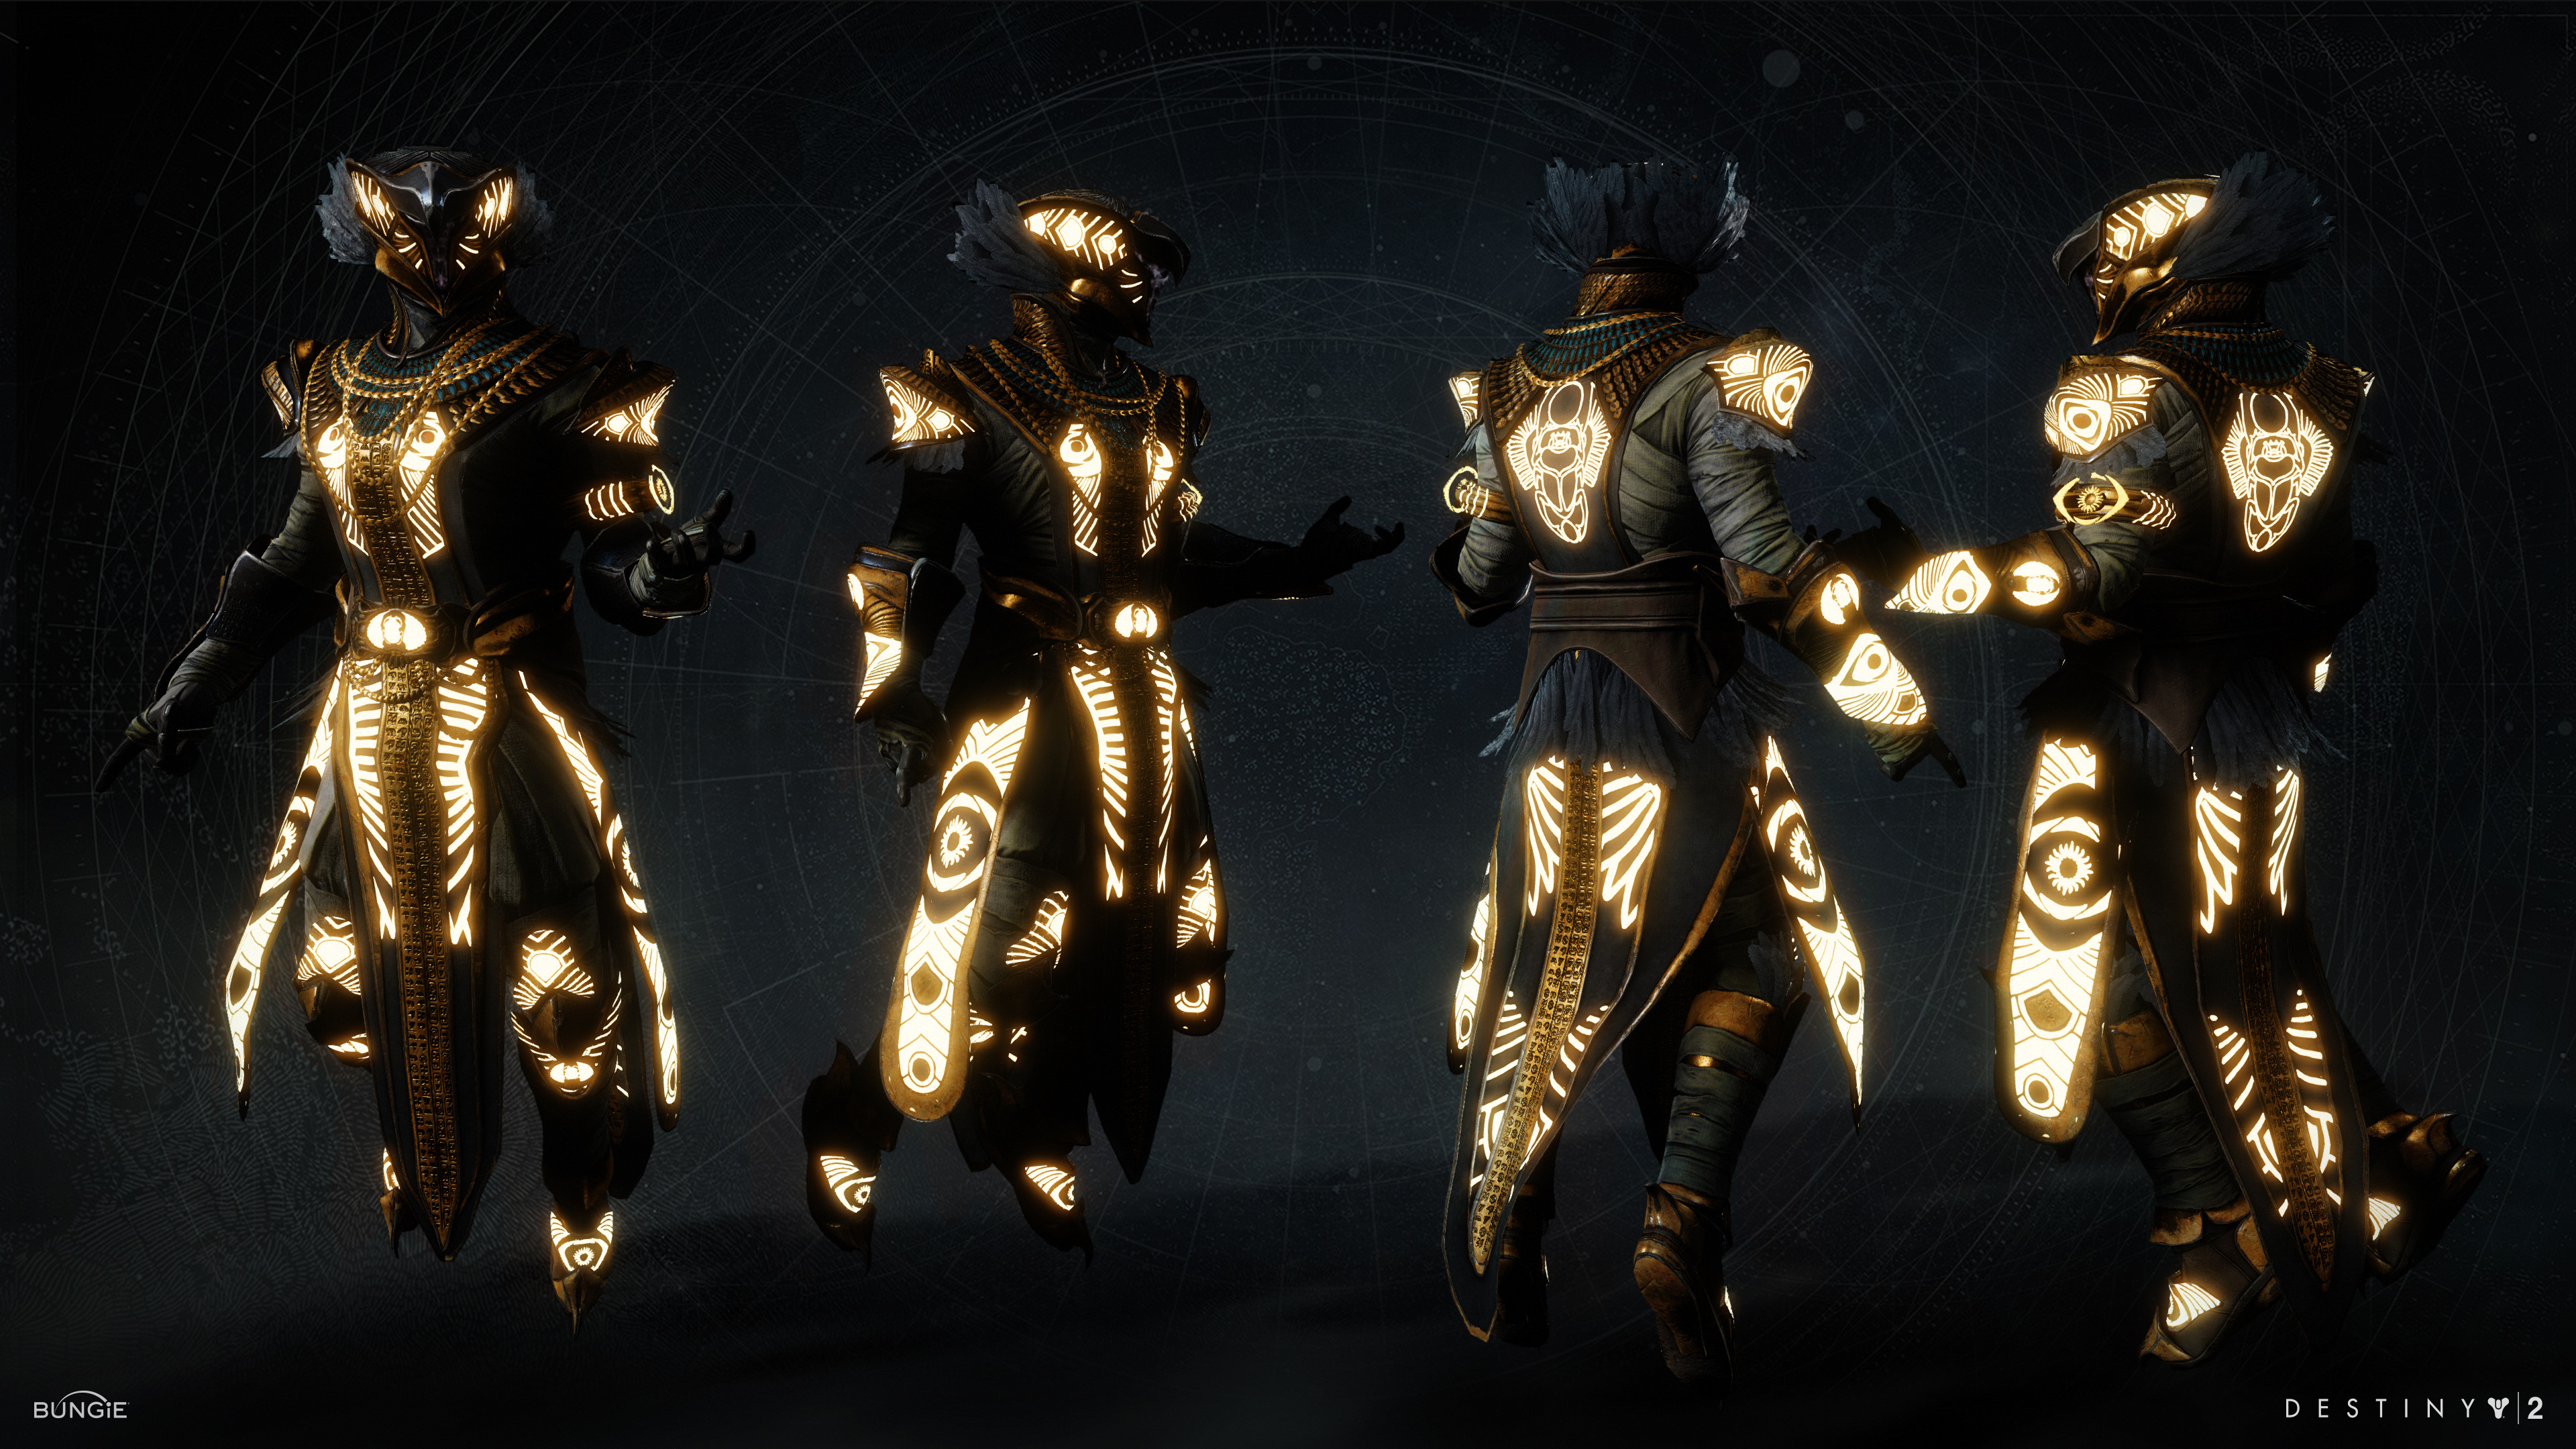 Glow on the armor pieces that activates when you achieve Flawless (no deaths) in the Trials PVP mode